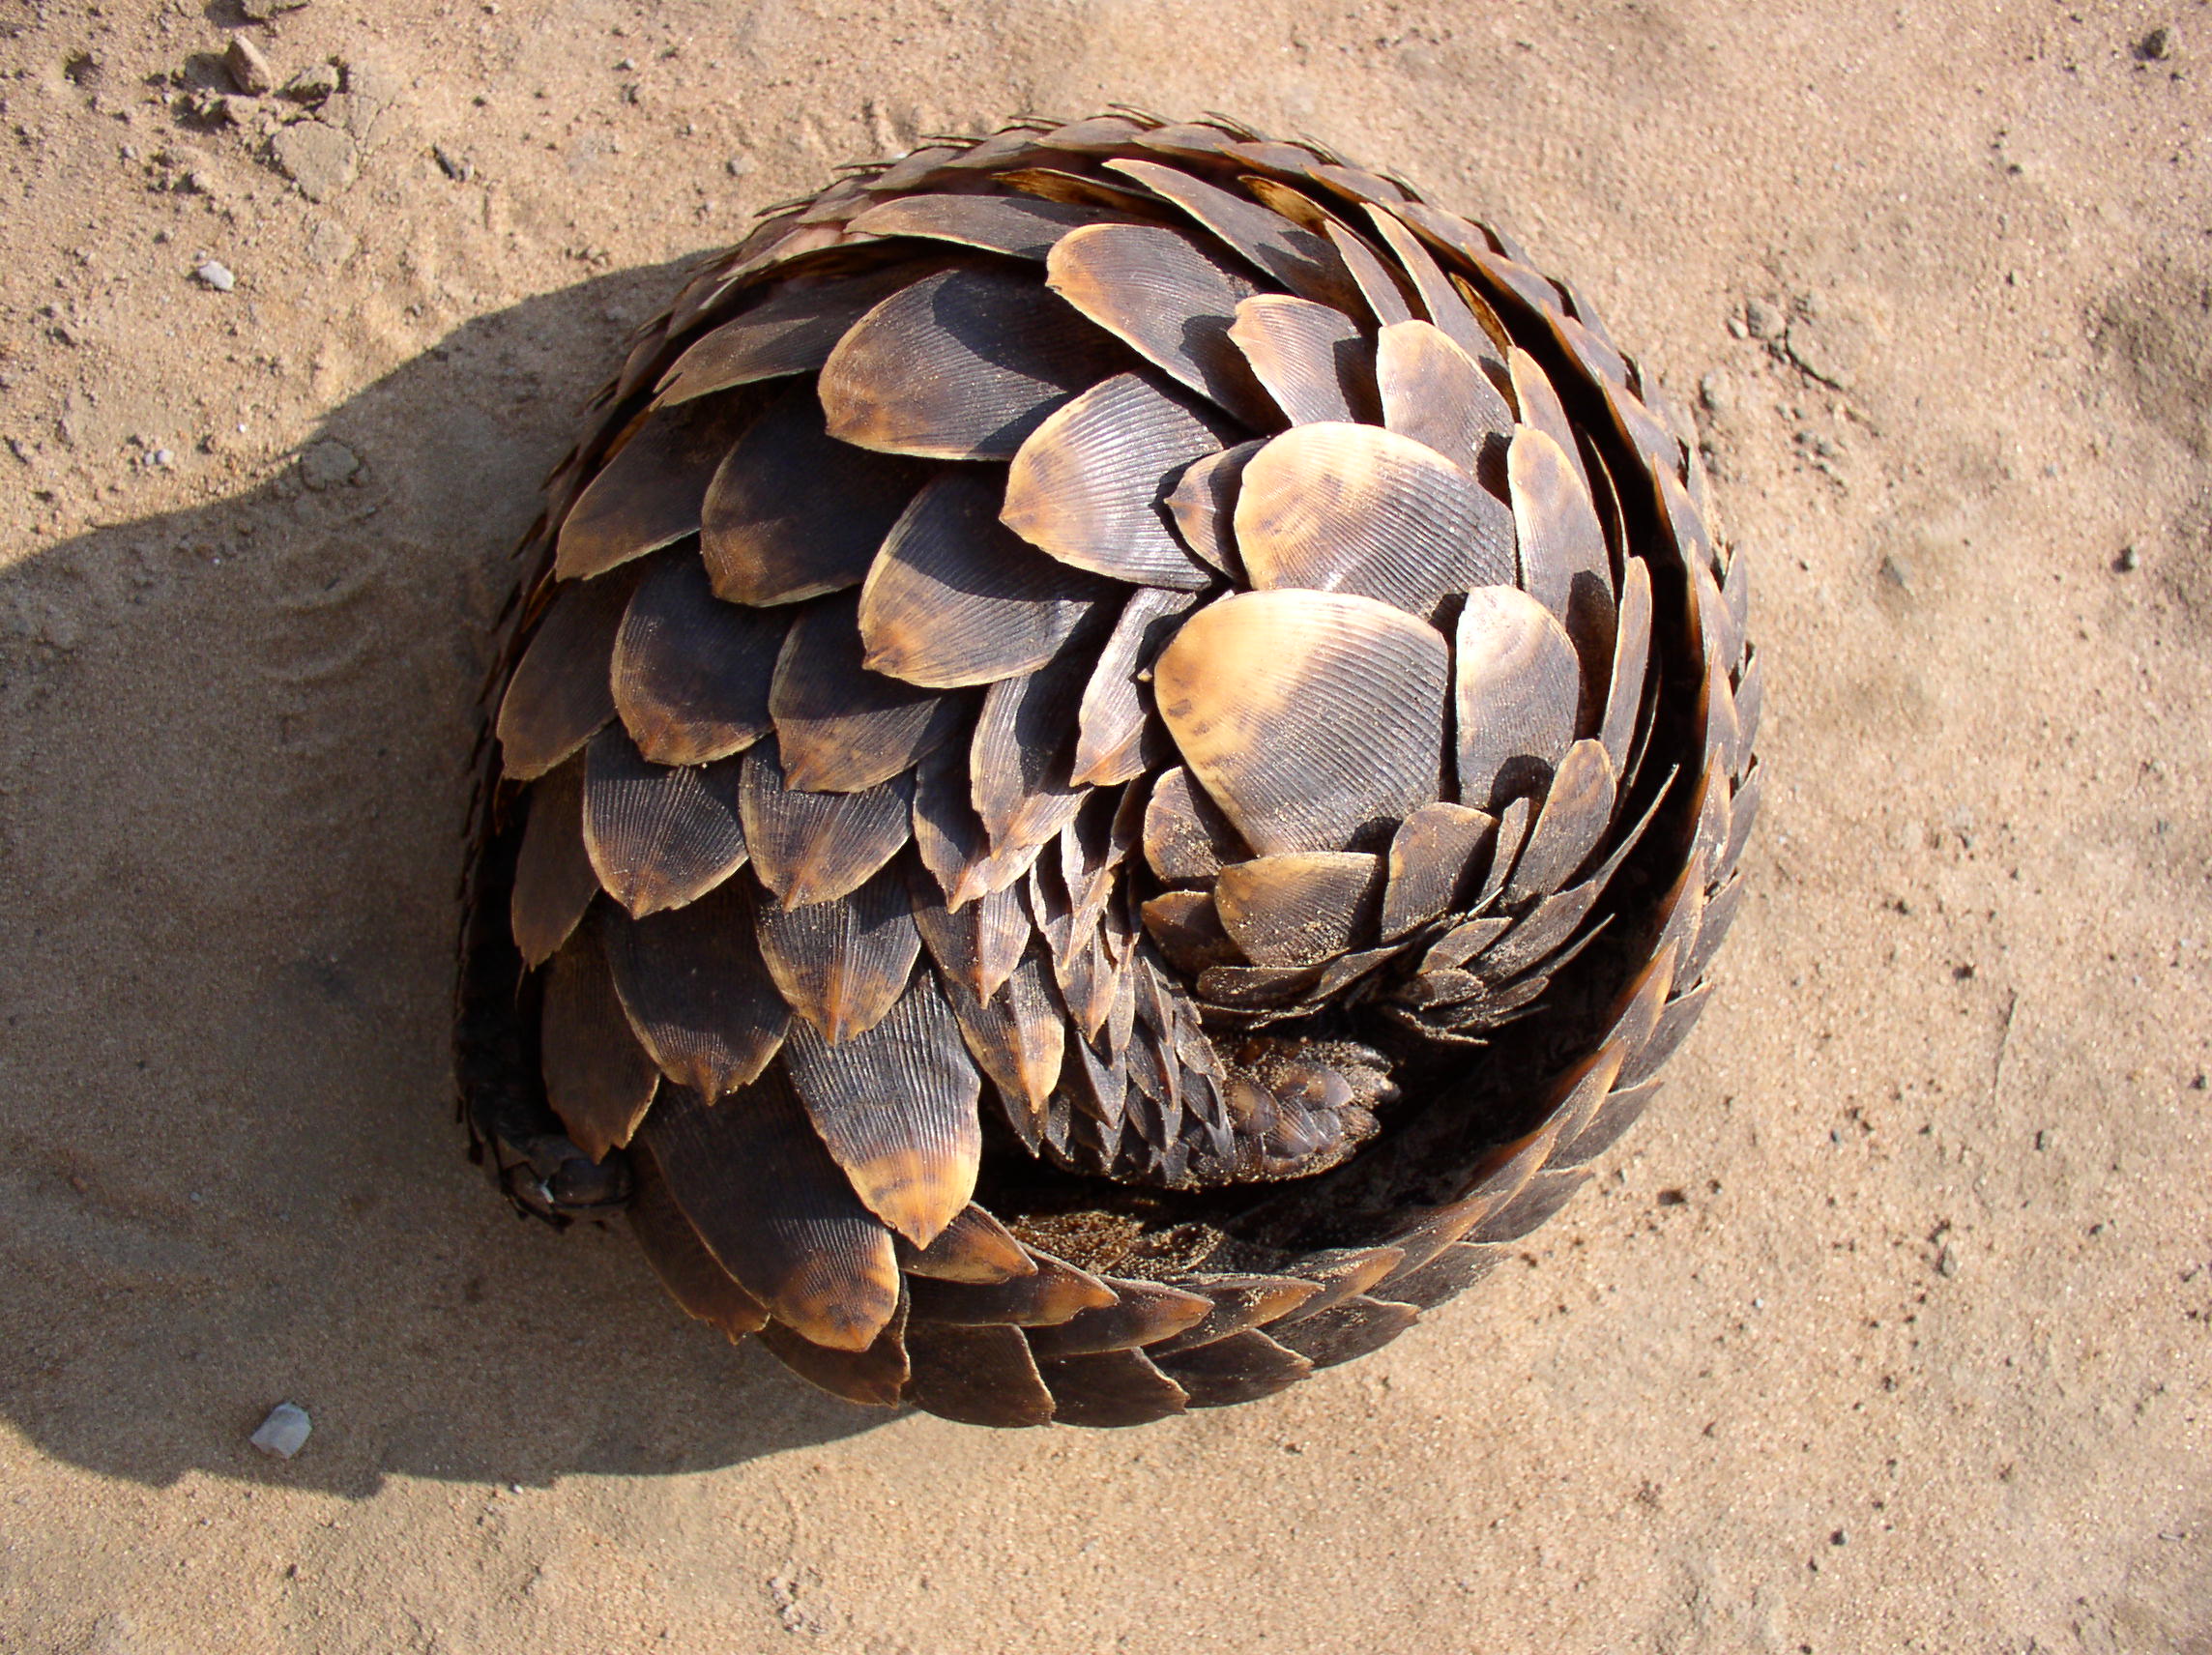 Pangolin | POACHING PROBLEMS IN INDONESIA